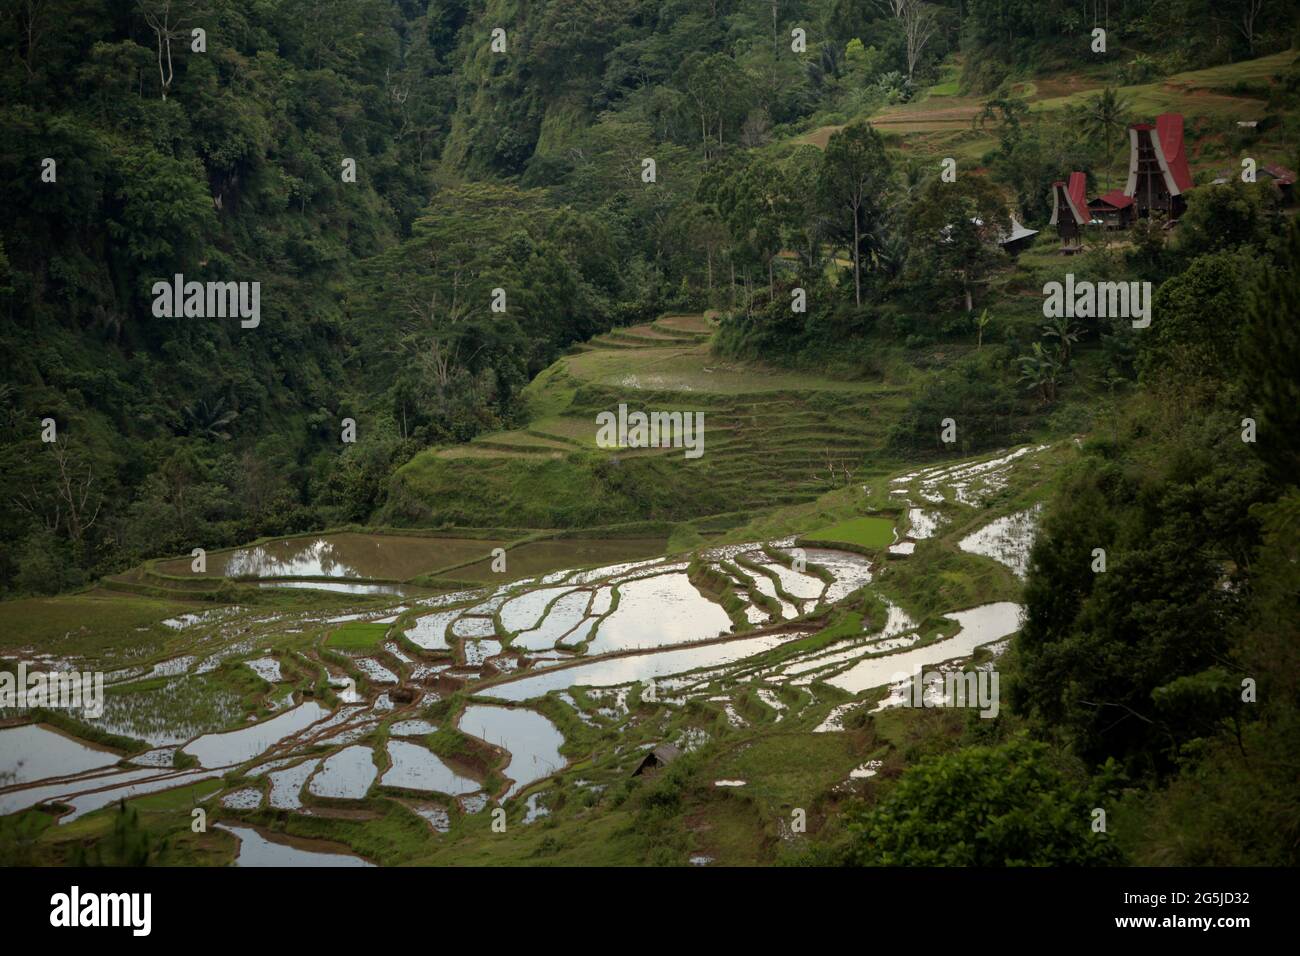 Rice terraces in Piongan village, North Toraja, South Sulawesi, Indonesia. Higher temperatures caused by global warming are projected to reduce rice crop yields in Indonesia. Changes in El Nino patterns, that impact the onset and length of the wet season, are also sending agricultural production to a vulnerable status. Developing new, or improved local rice varieties that more resilient--echoing recent studies in other countries--could be one of the keys to mitigate. Stock Photo